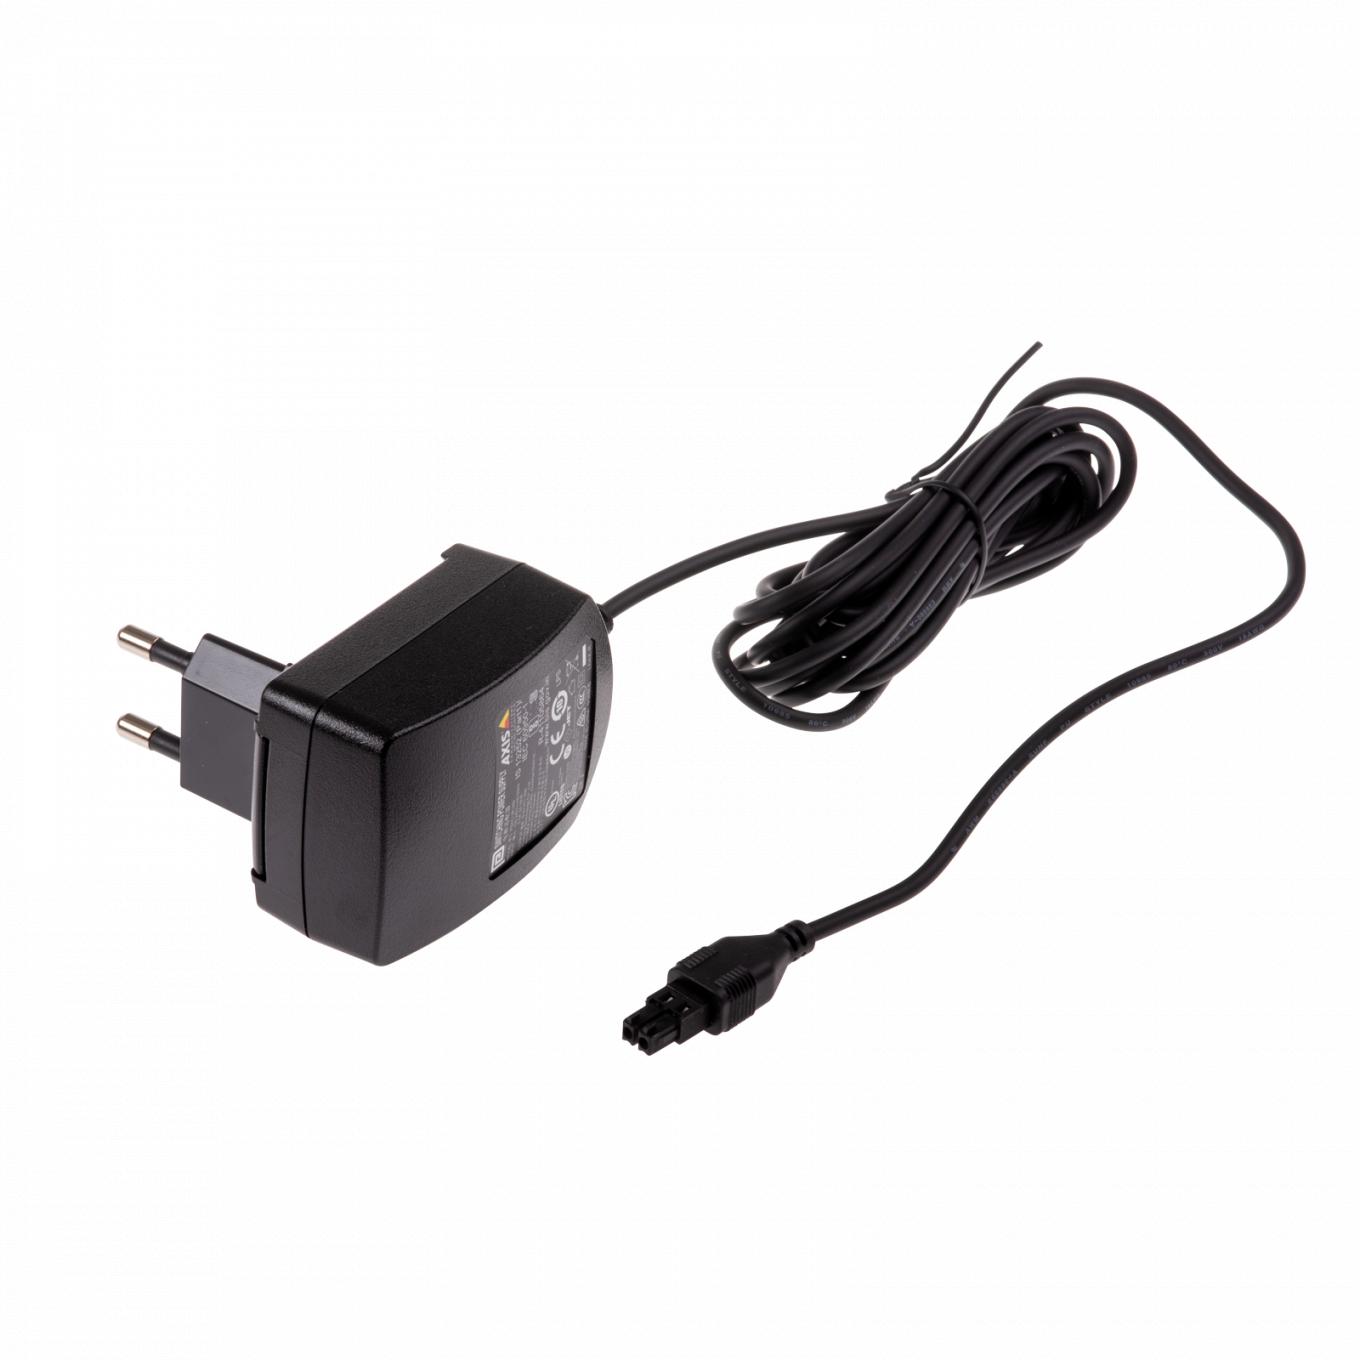 Power mains adapter PS-K T-C from left